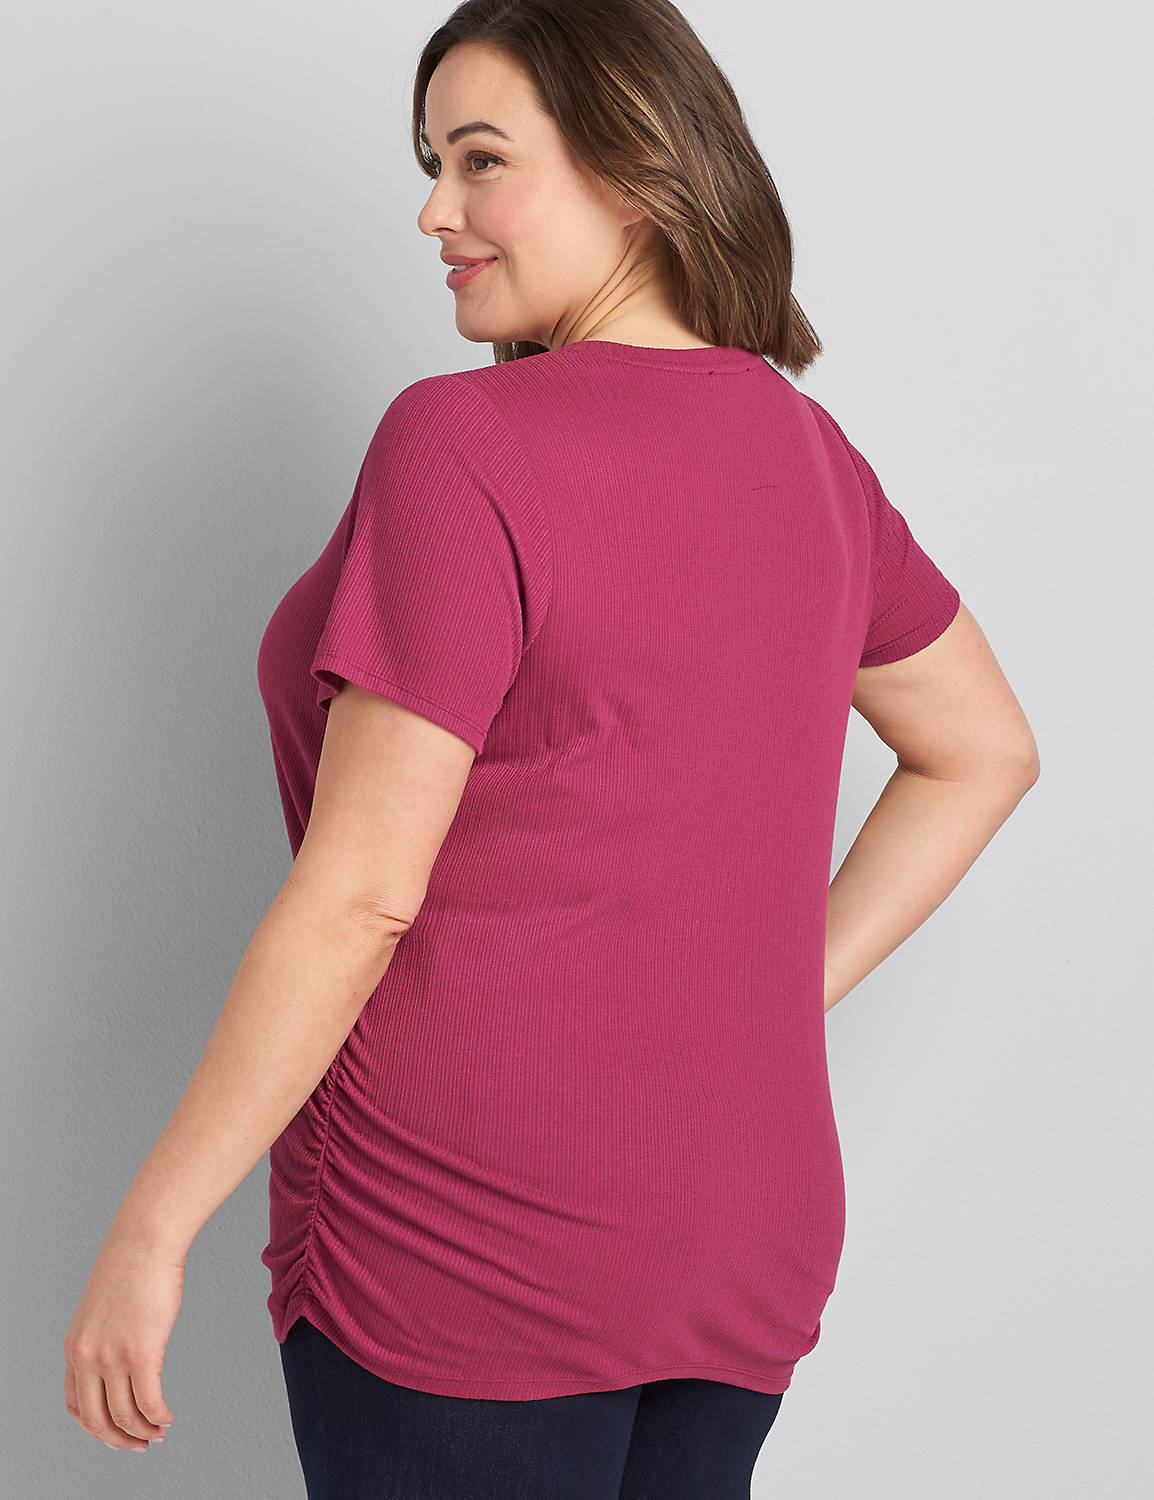 Pointelle Ruched Side Tee Product Image 2